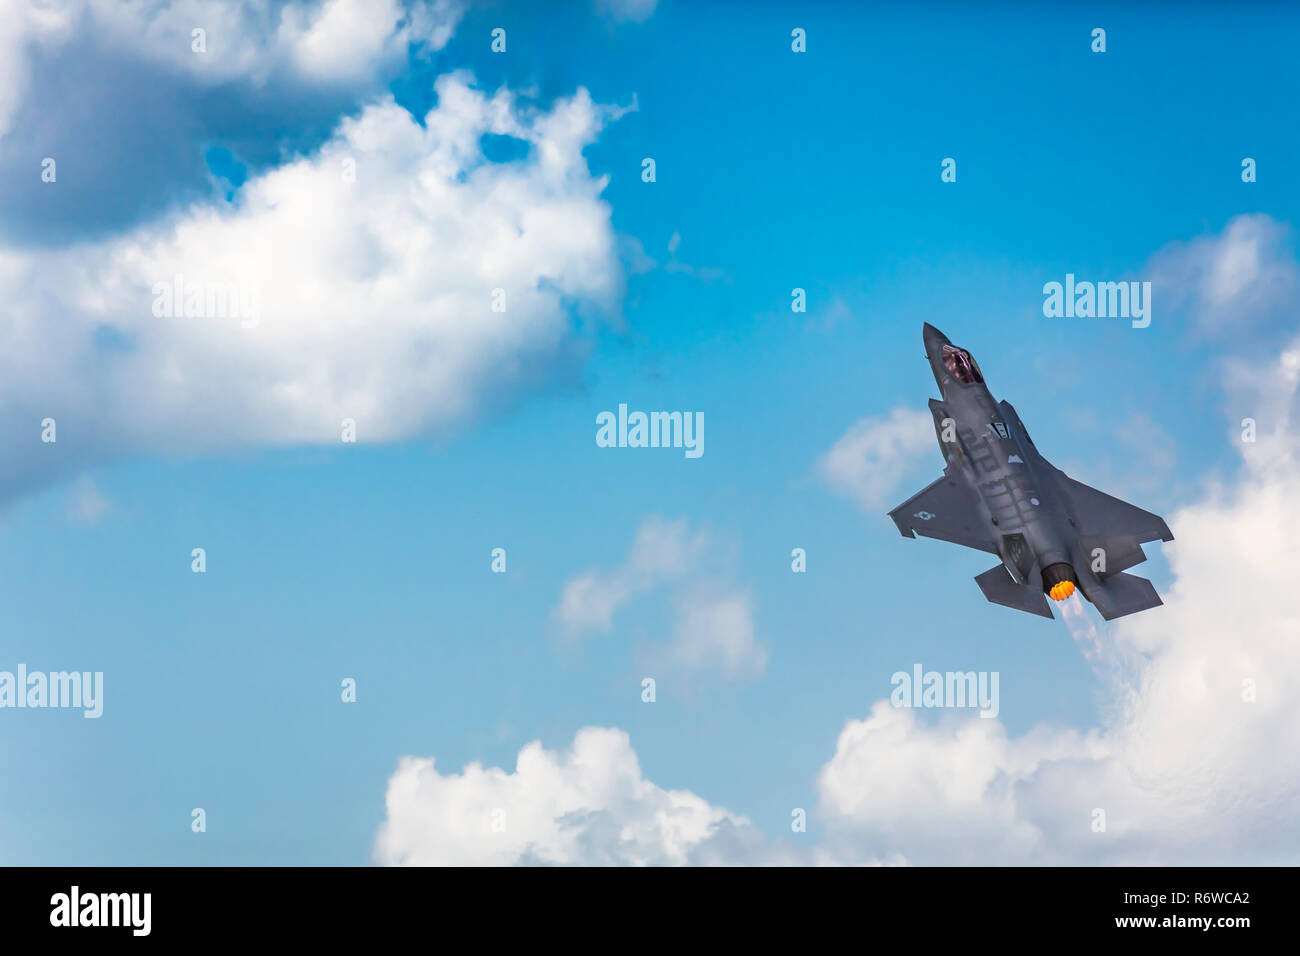 The Lockheed Martin F-35A fighter jet in flight at the 2017 Airshow in Duluth, Minnesota, USA. Stock Photo